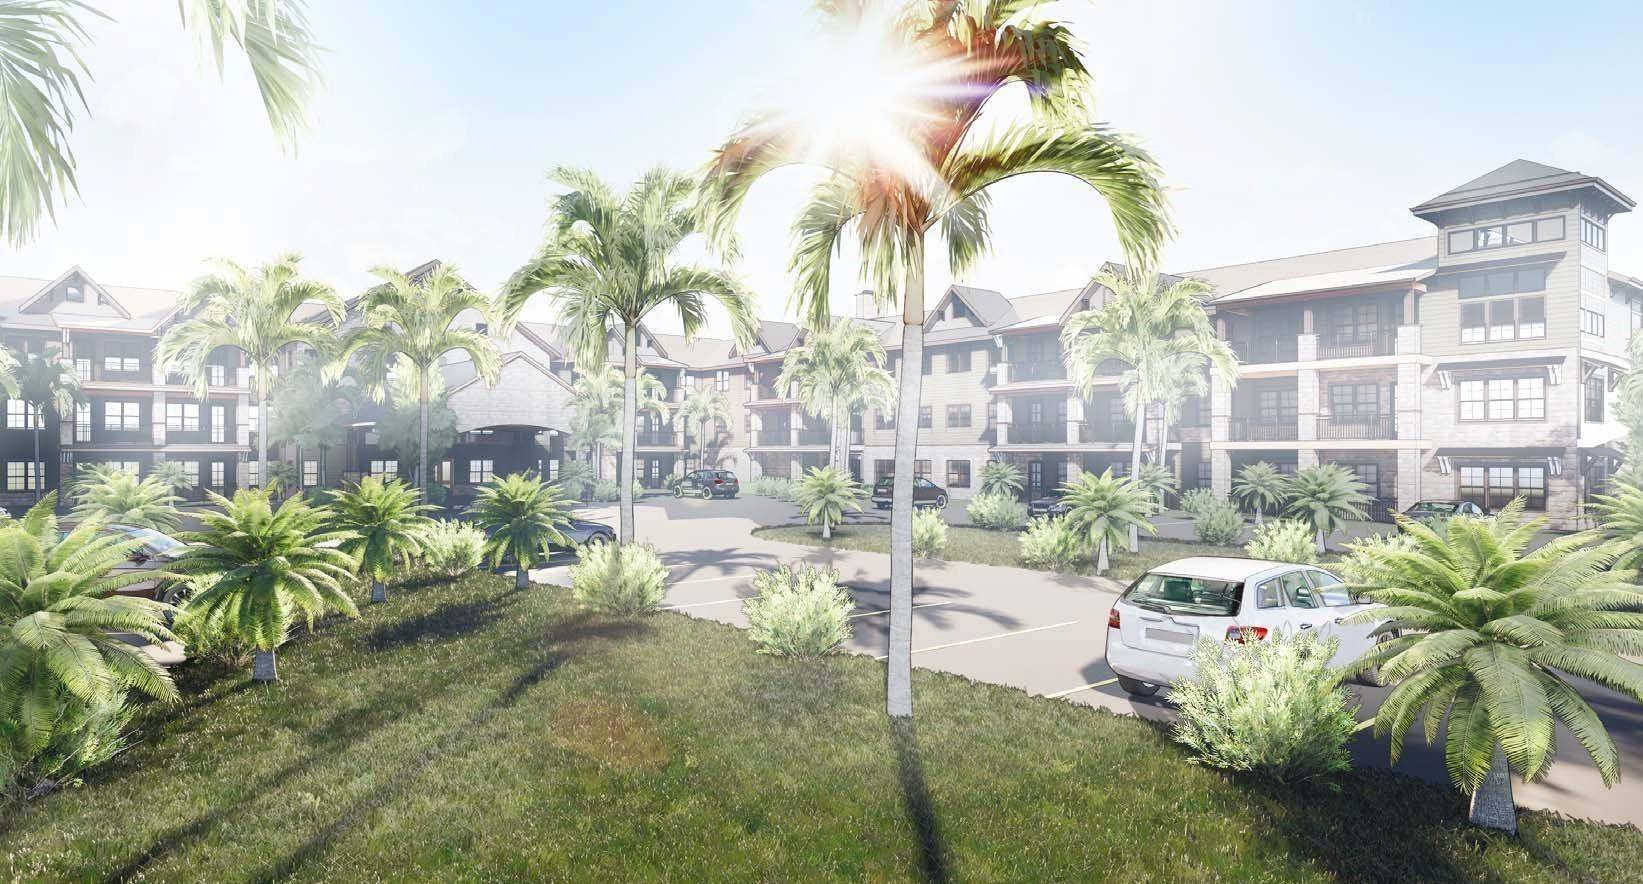 ALF Development Opportunity Approved for 124 Units on 4 acresREADY for Building Plans for up to 120, 000 SF of Certified Senior Living use.